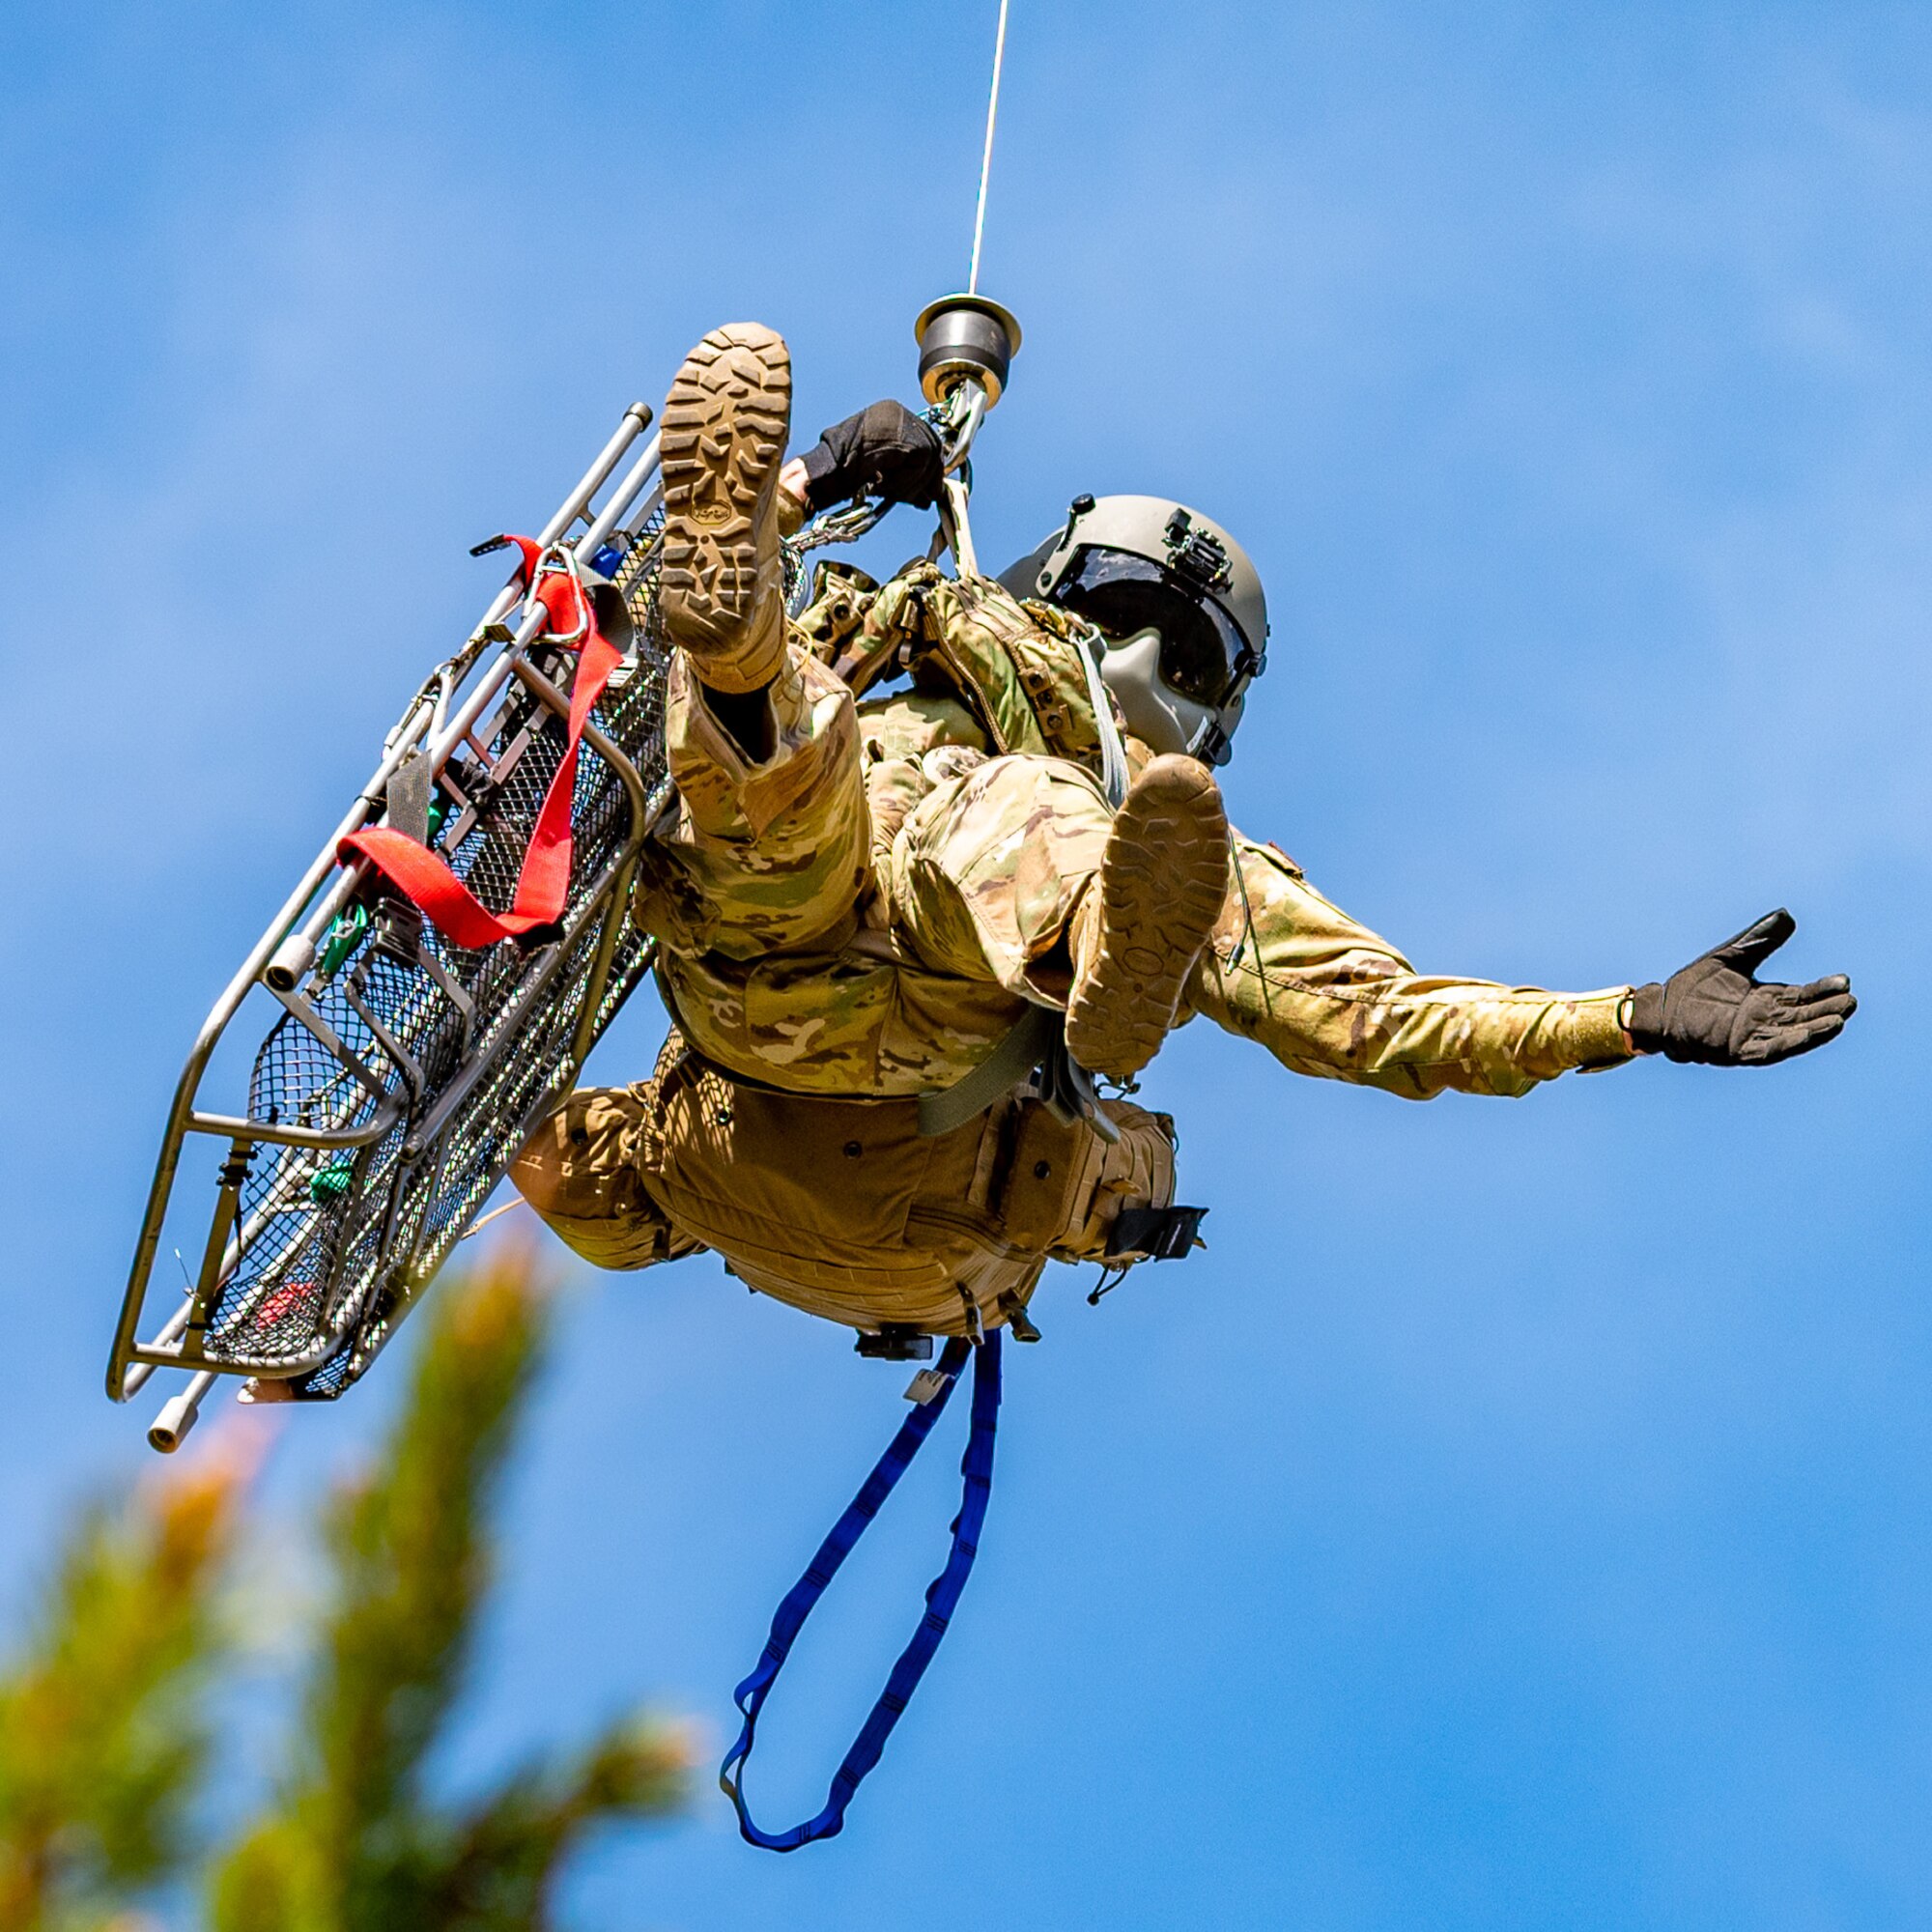 Capt. Noah Russell, 341st Operational Medical Readiness Squadron flight medic, rappels over the Highwood Mountains during a search and rescue exercise May 24, 2022, near Great Falls, Mont.